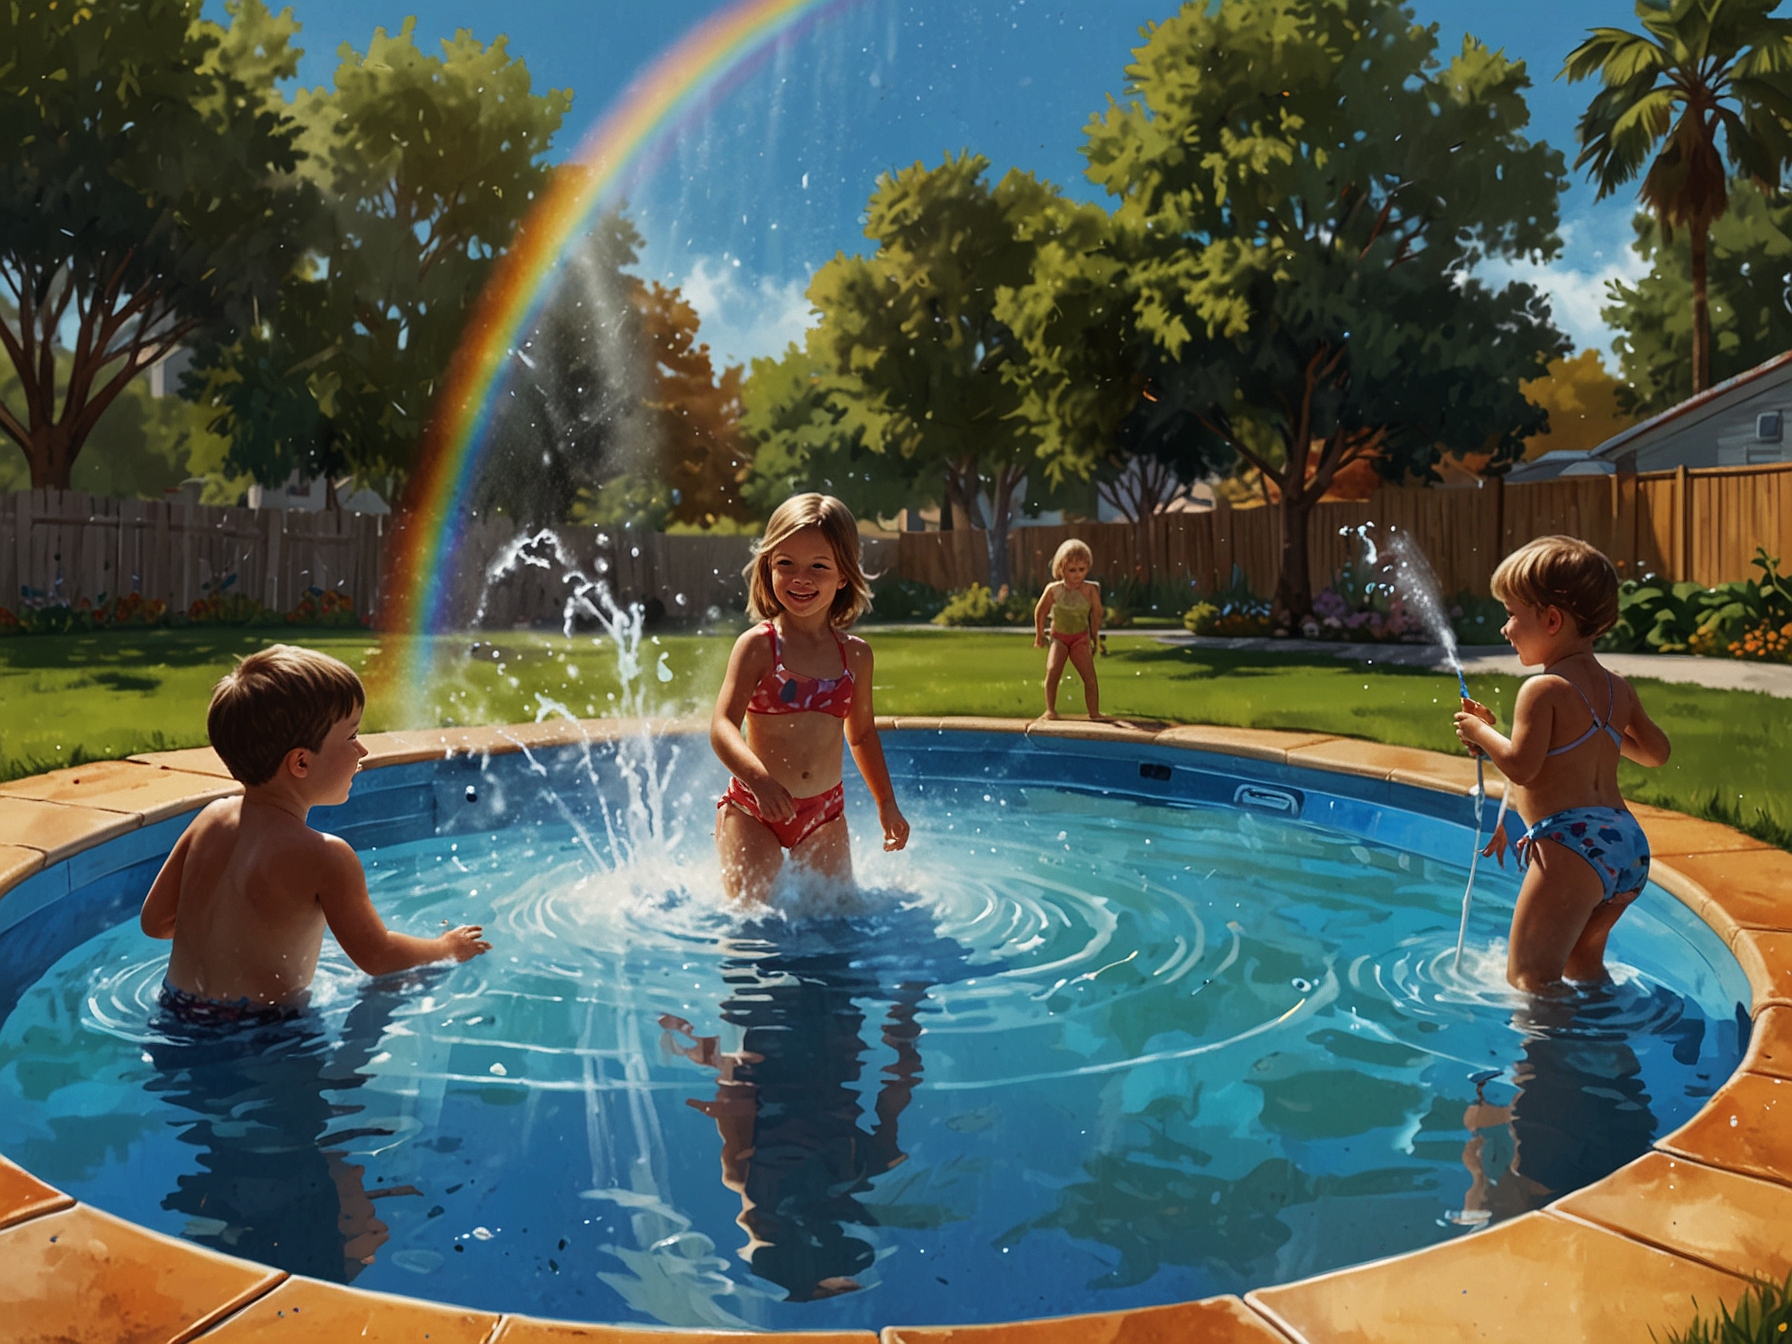 A vibrant scene of a family enjoying the FUNBOY Kid’s Rainbow Sprinkler Pool, with children happily playing in the splash pool and sprinkler system under a clear blue sky.